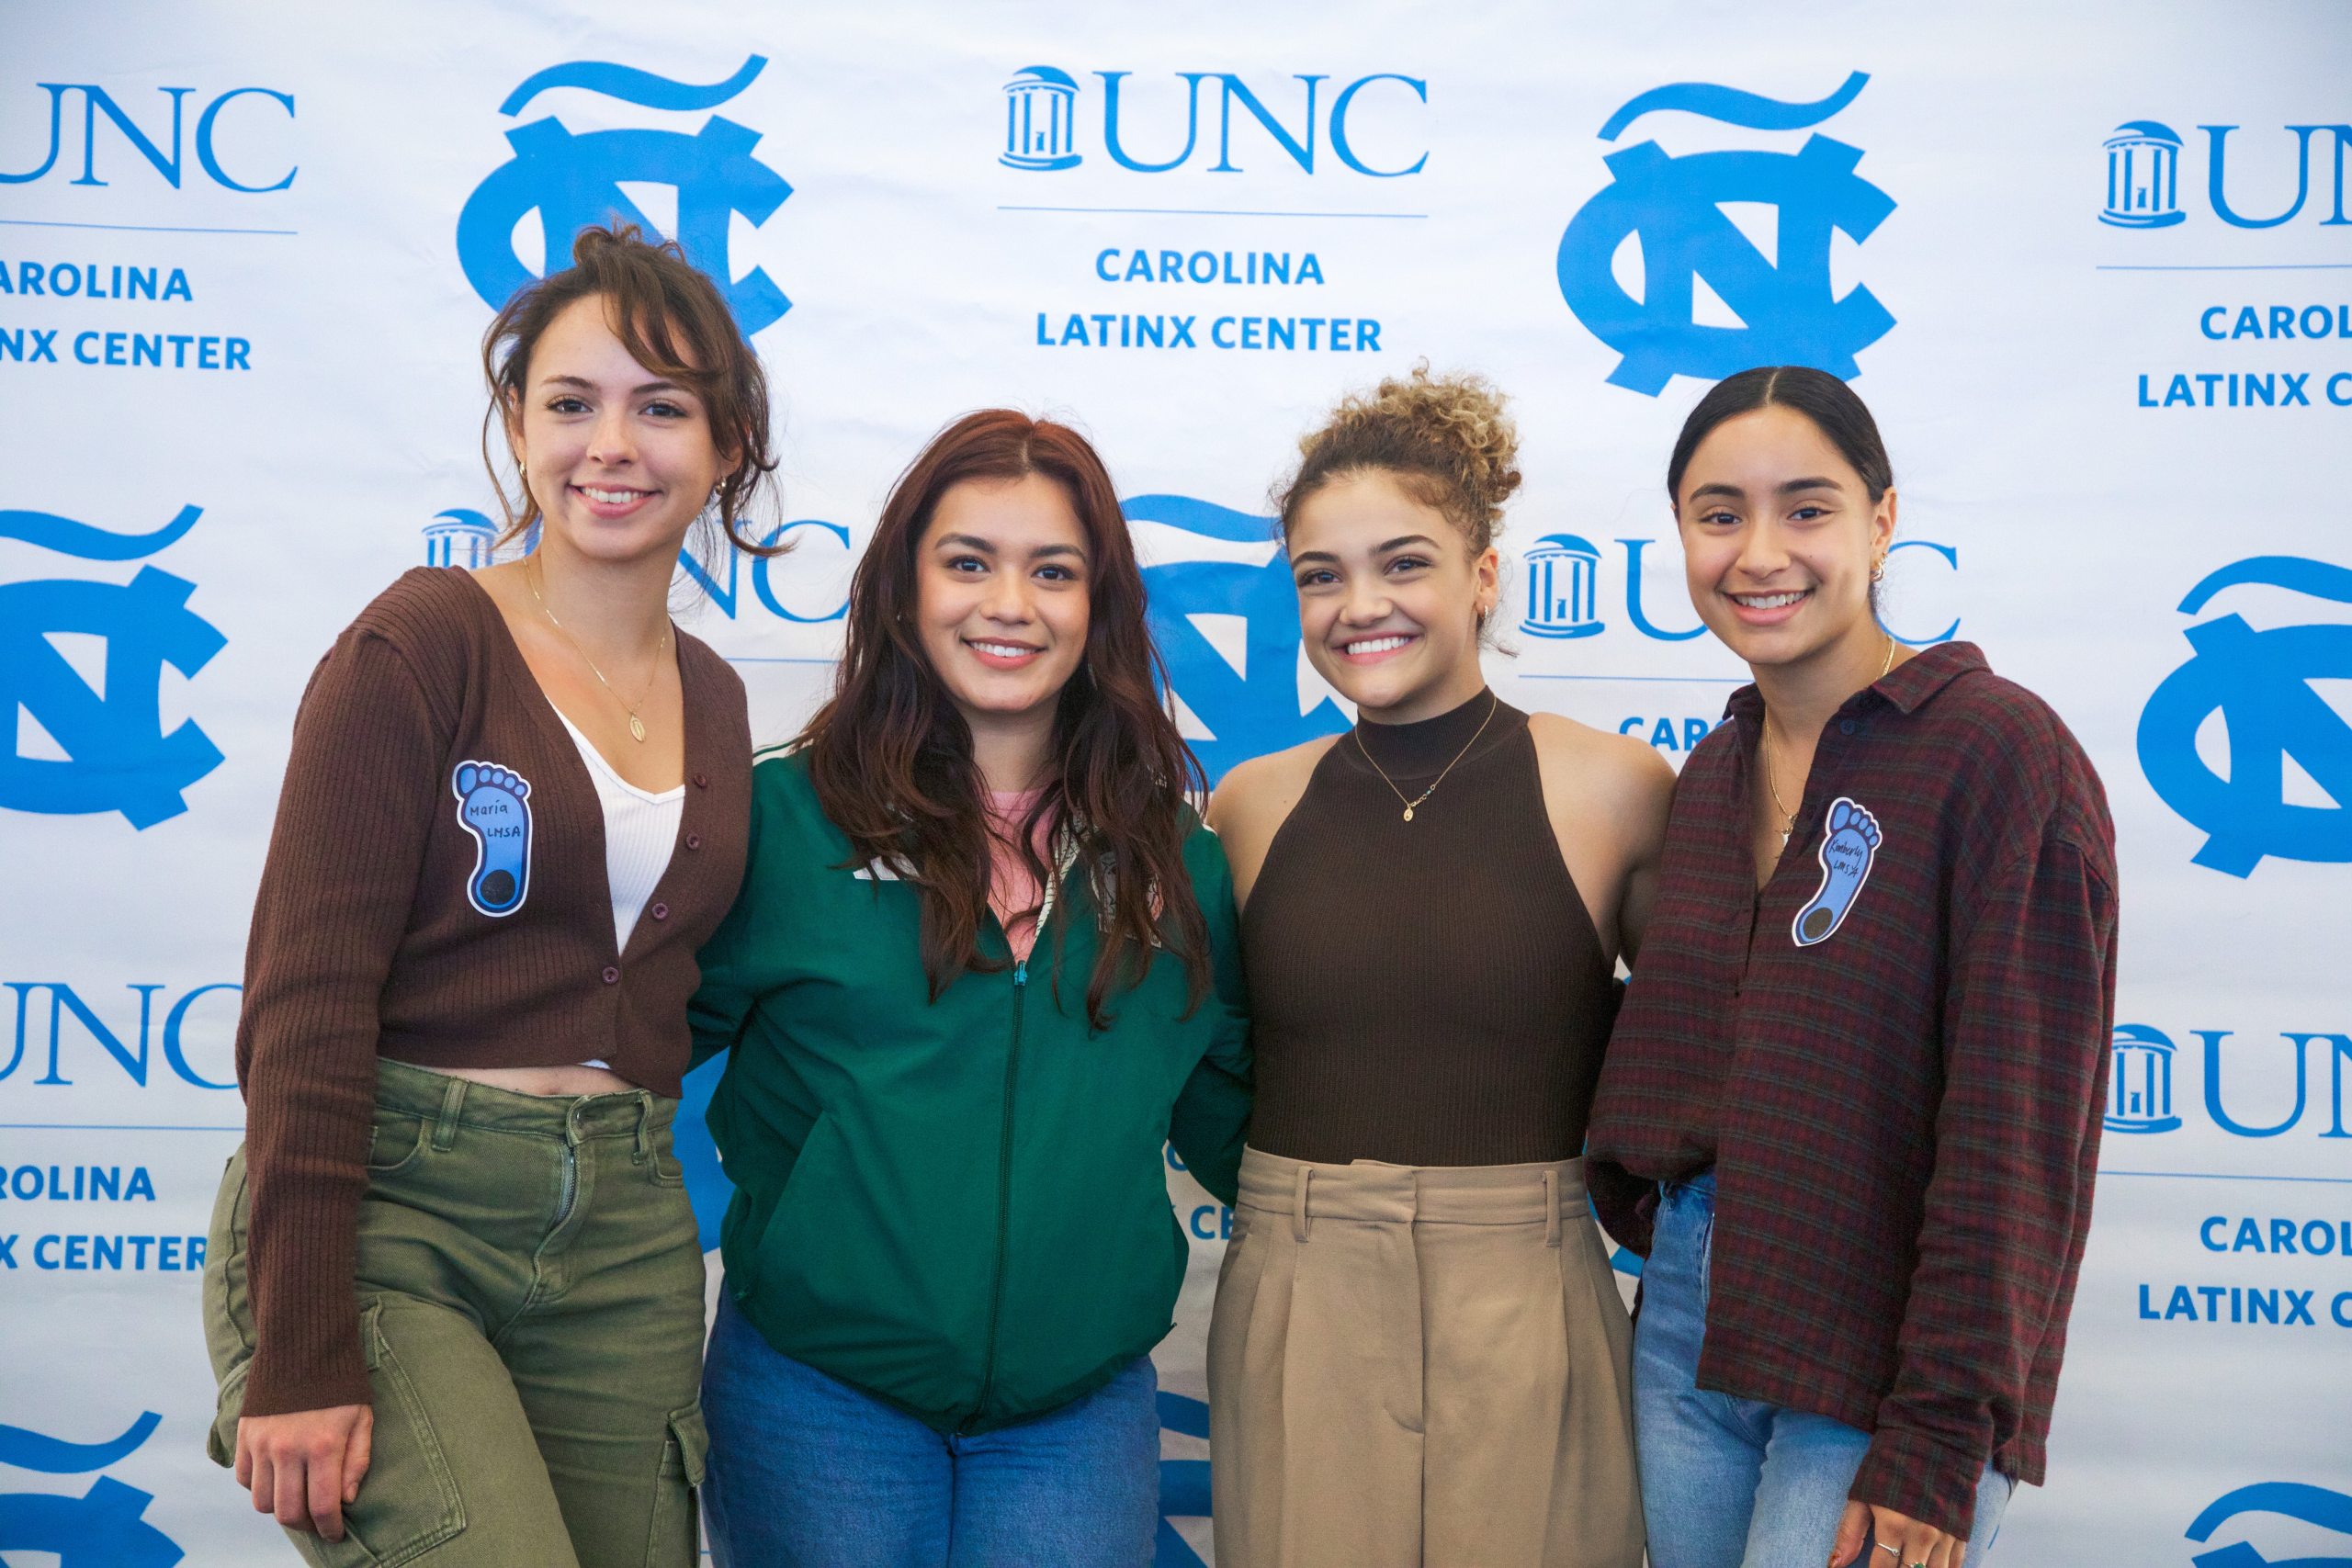 Laurie Hernandez posing with three young women